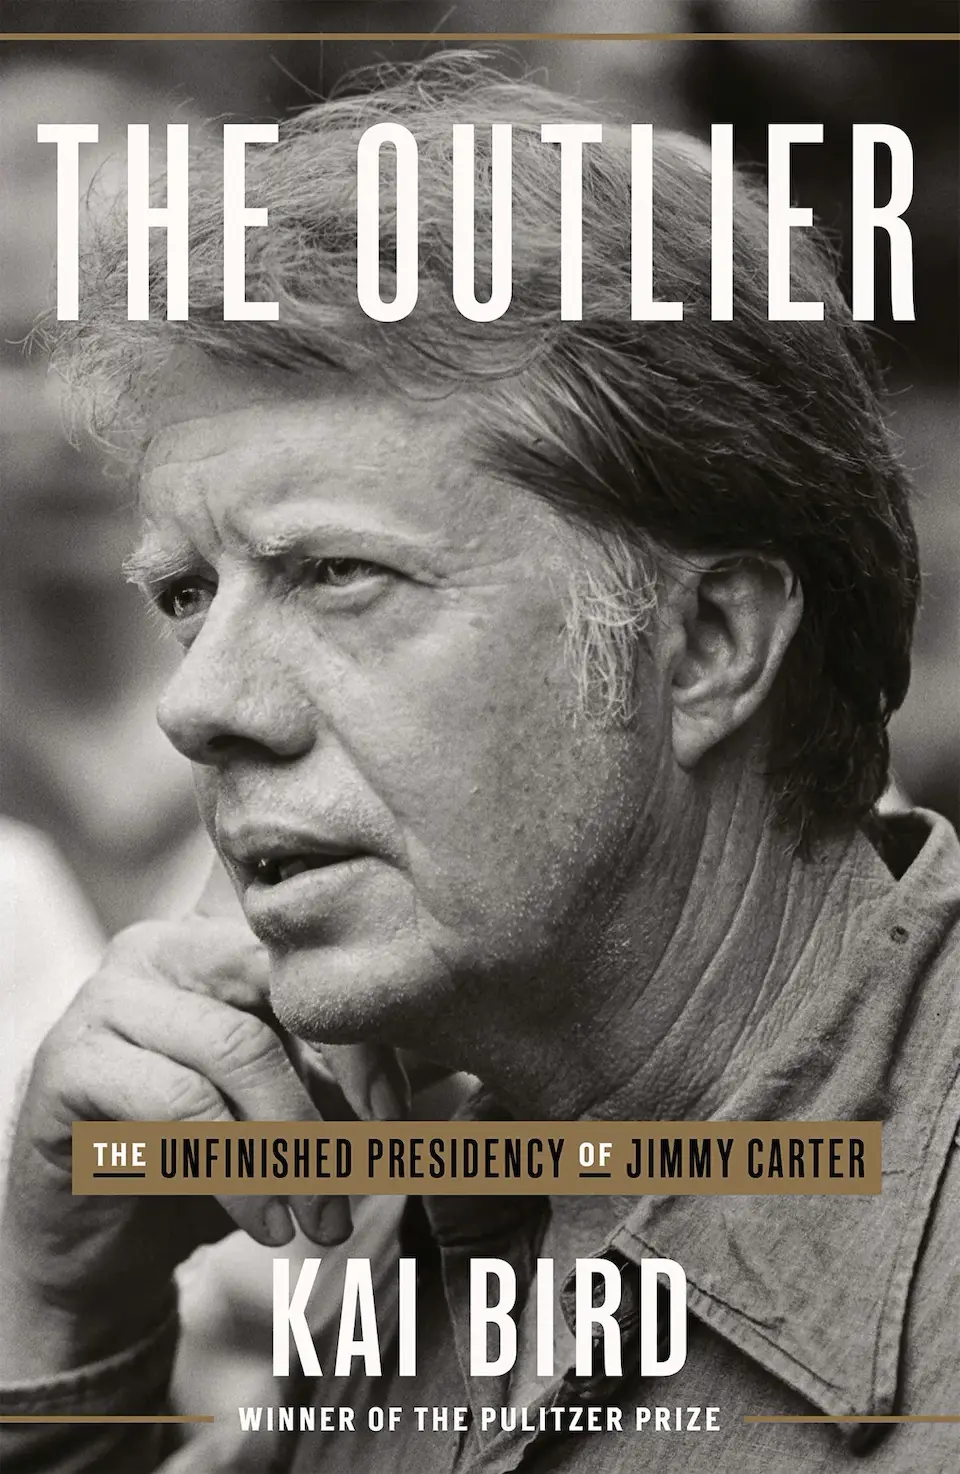 The Outlier: The Unfinished Presidency of Jimmy Carter by Kai Bird finished on 2022 Feb 04